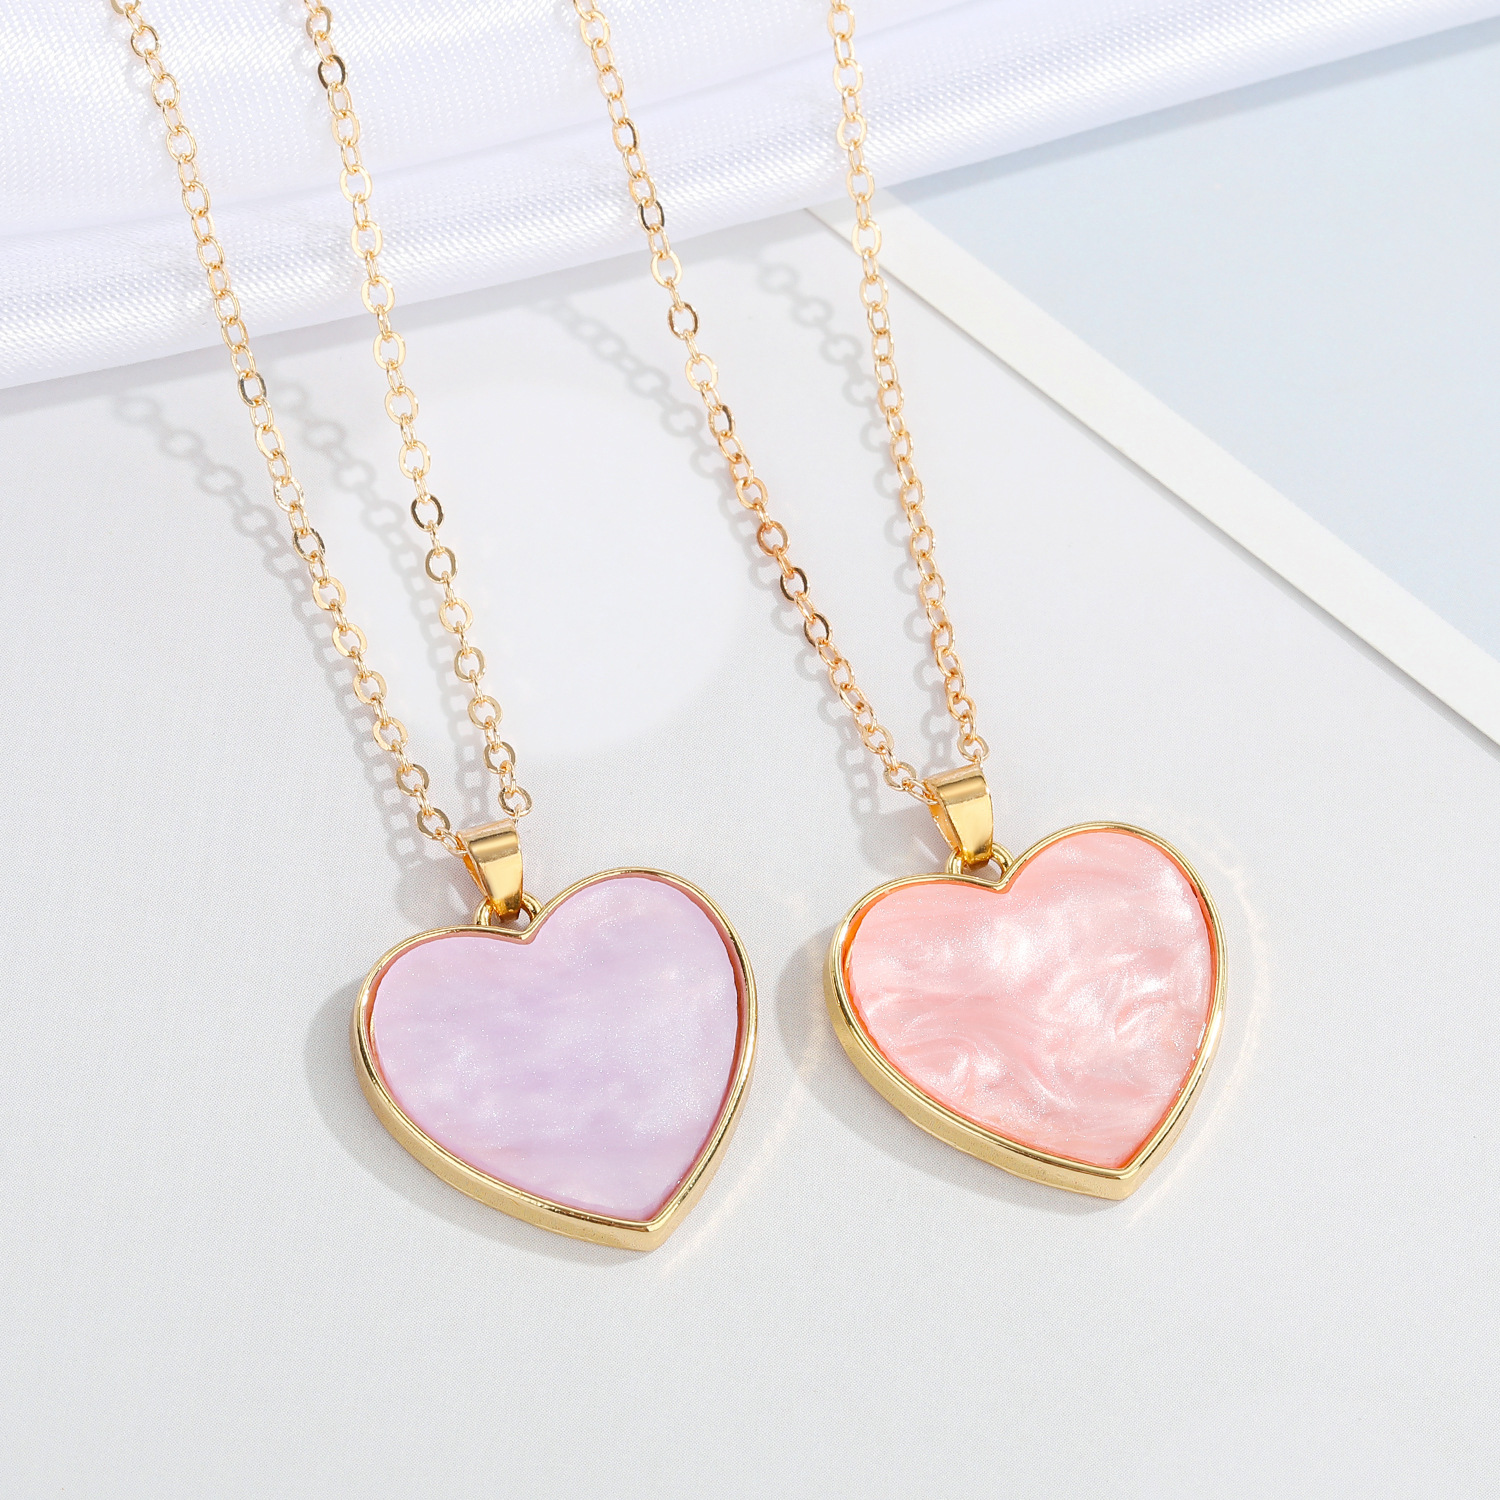 European CrossBorder Sold Jewelry Acetate Love Necklace Simple Ins Style AllMatch Love Pendant Clavicle Chain Female Necklacepicture5